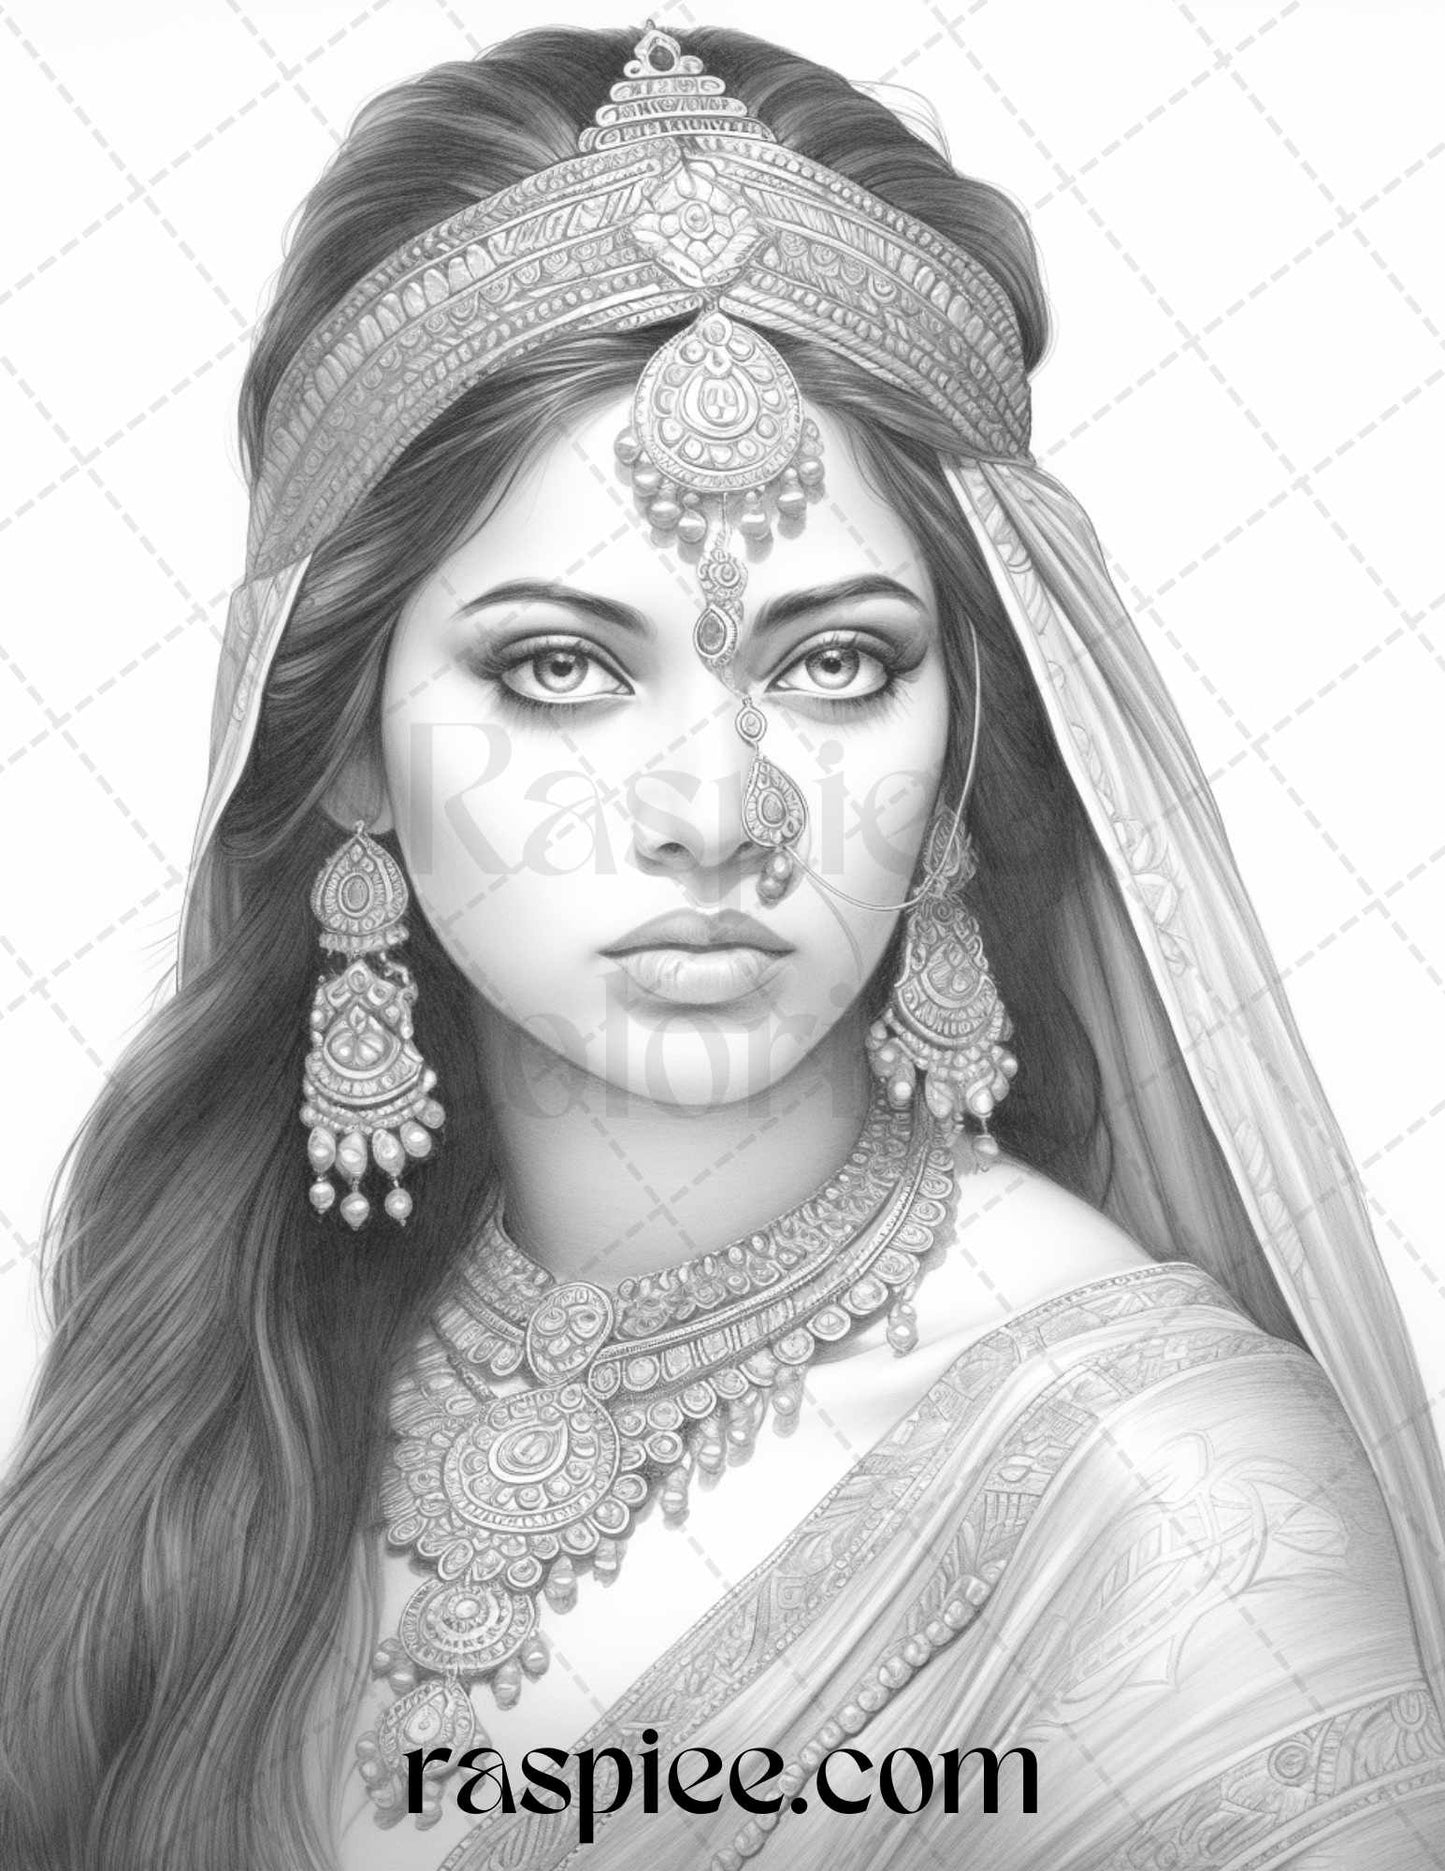 Indian Women Grayscale Coloring Pages, Stress Relief Adult Coloring Sheets, Mindful Coloring Activities for Relaxation, Detailed India Inspired Coloring Designs, Women Empowerment Coloring Pages, Portrait Coloring Pages for Adults